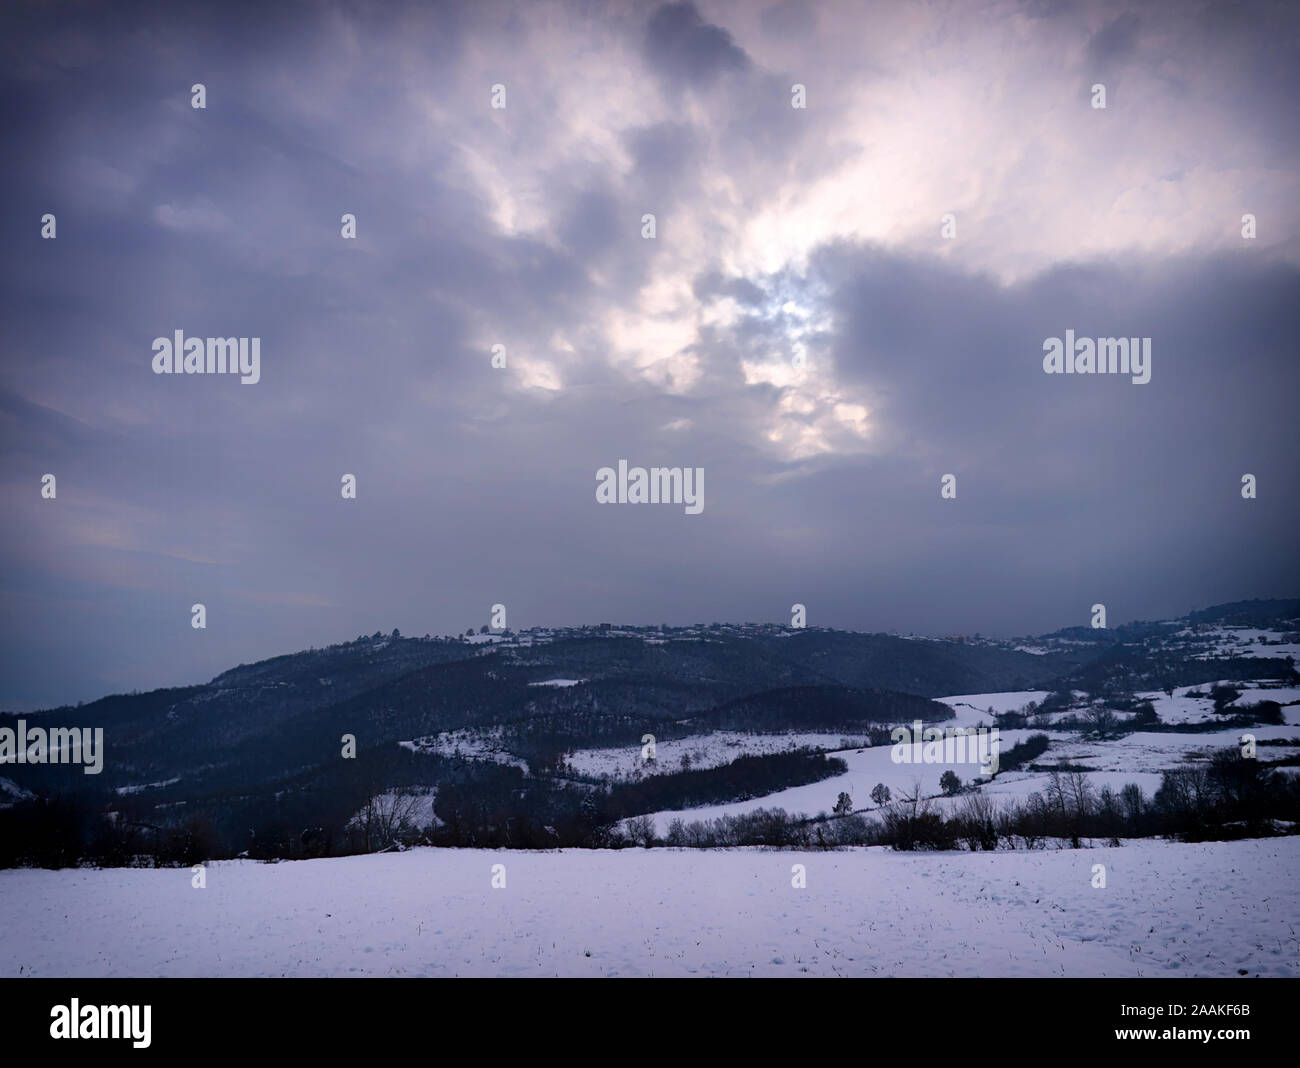 Soft focus dreamy winter landscape. Mountains and land covered in snow, Pieria, Greece. Stock Photo